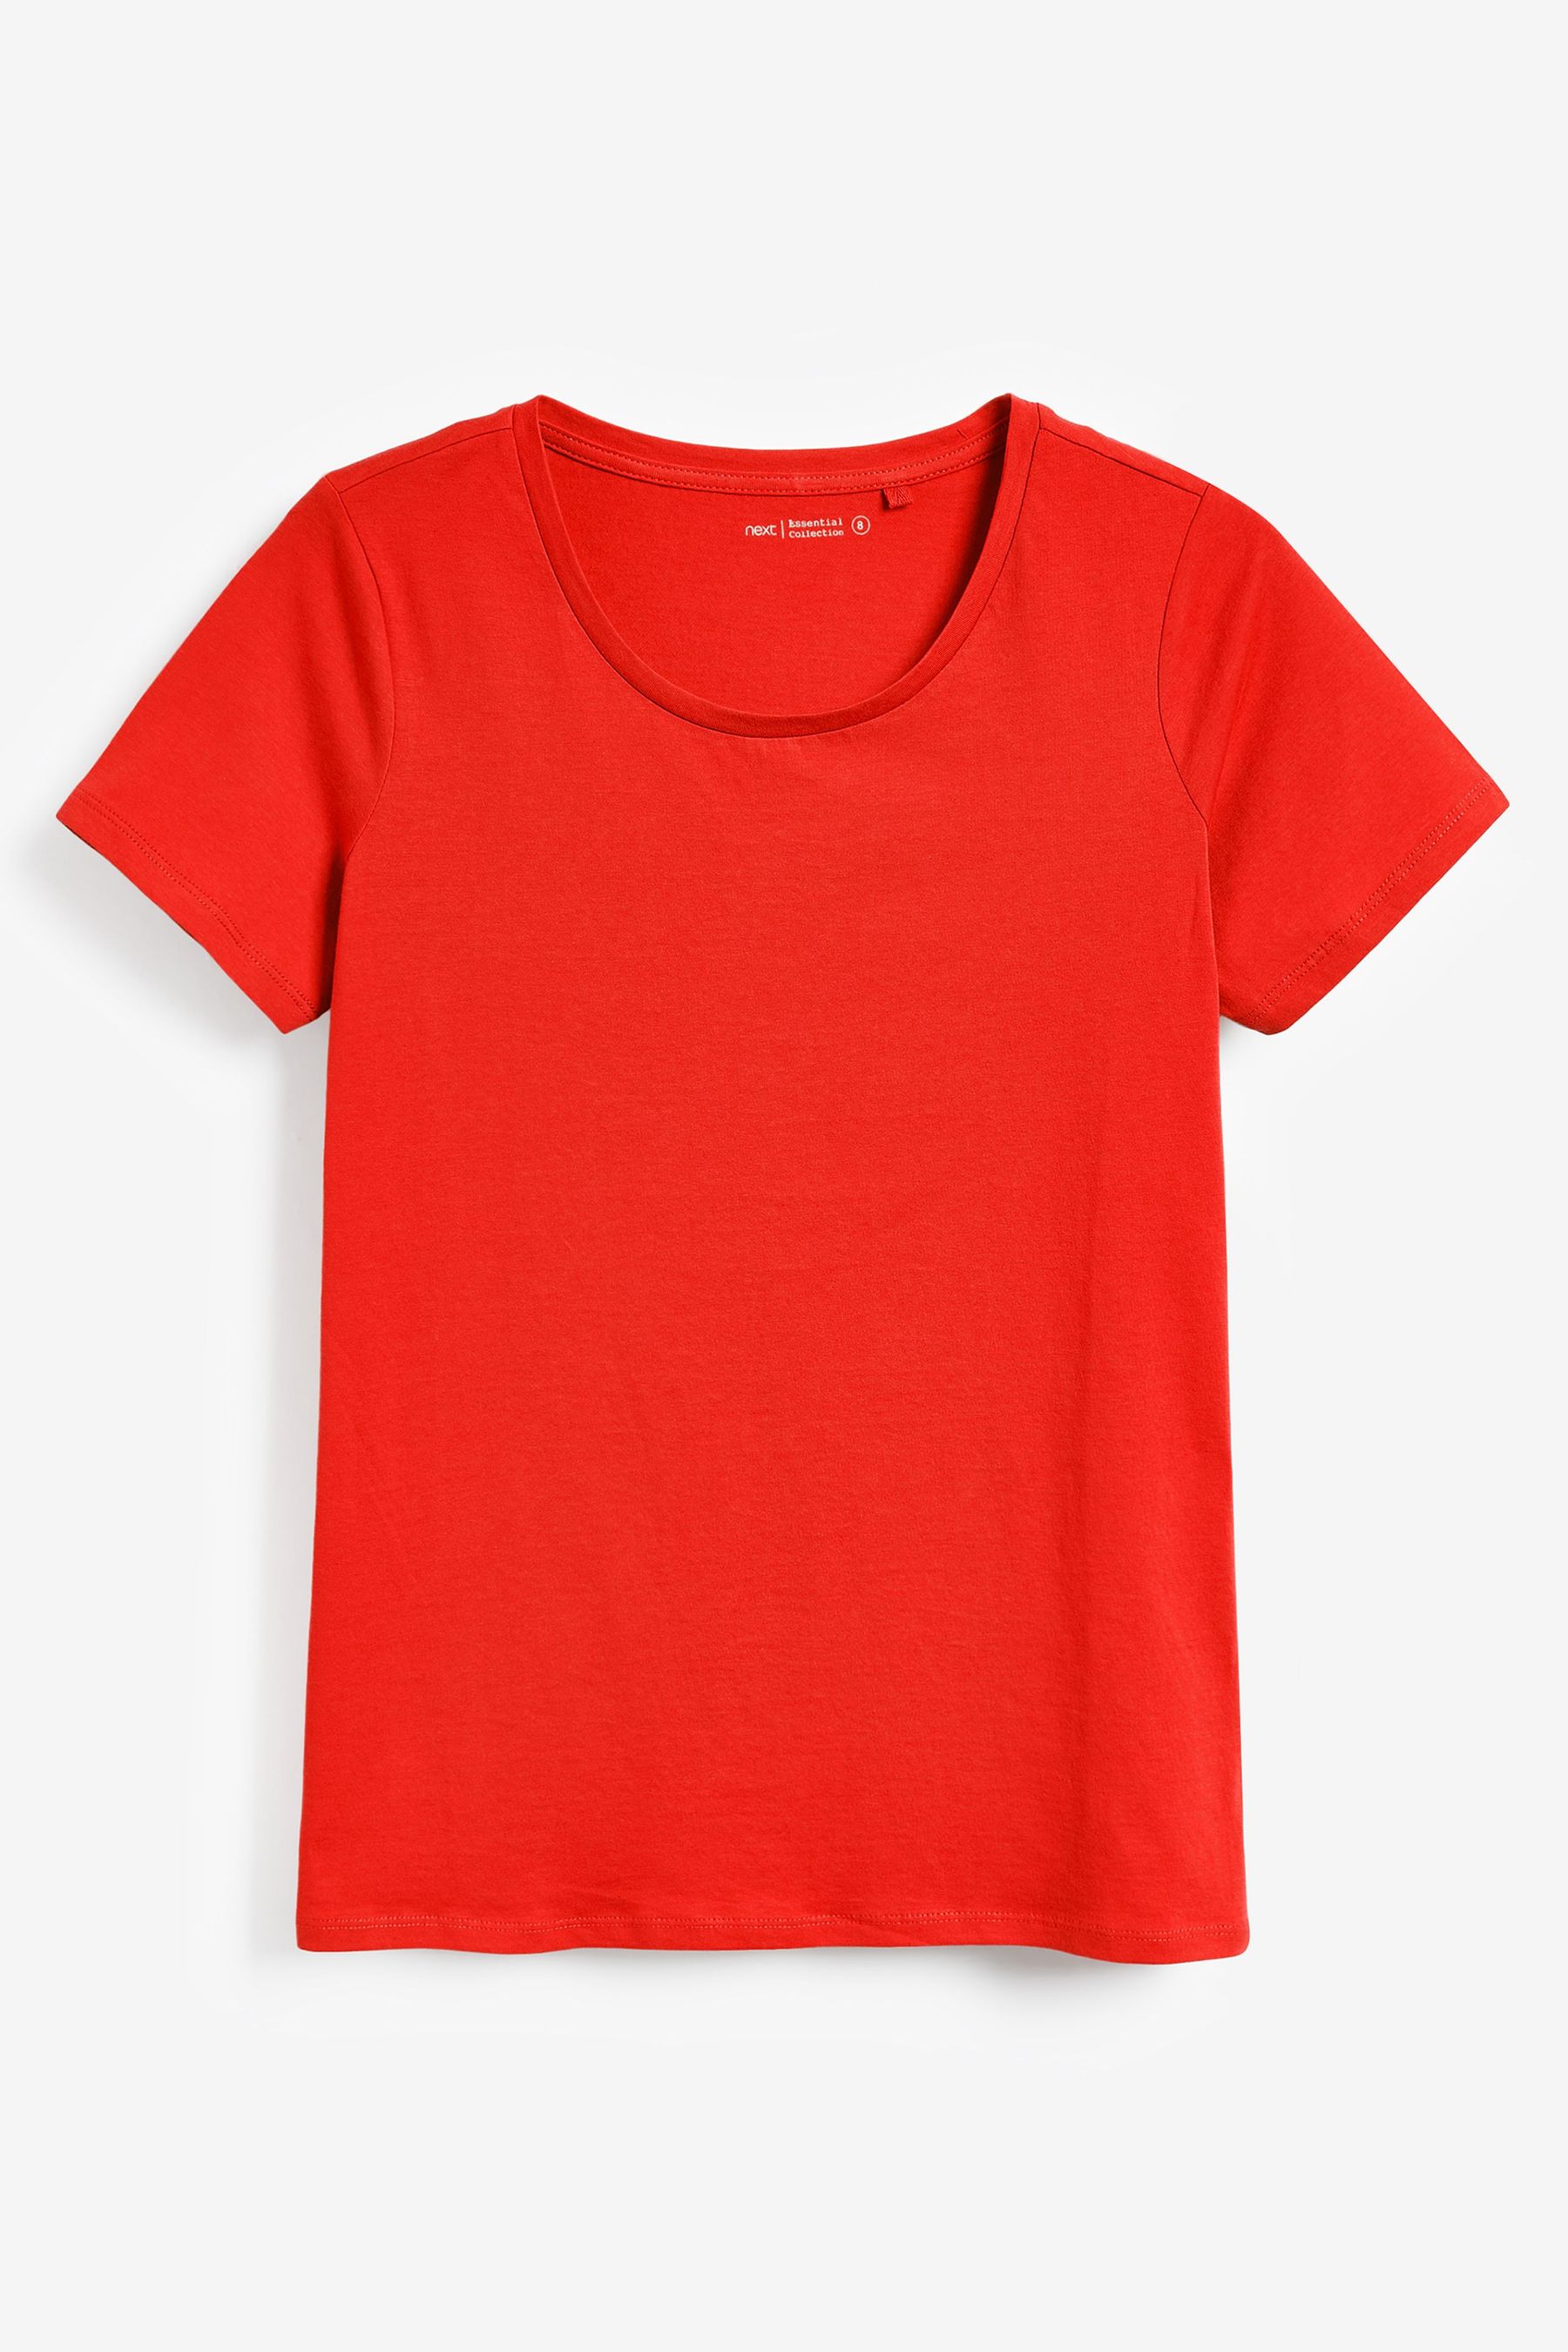 Buy Red Crew Neck T-Shirt from Next Ireland